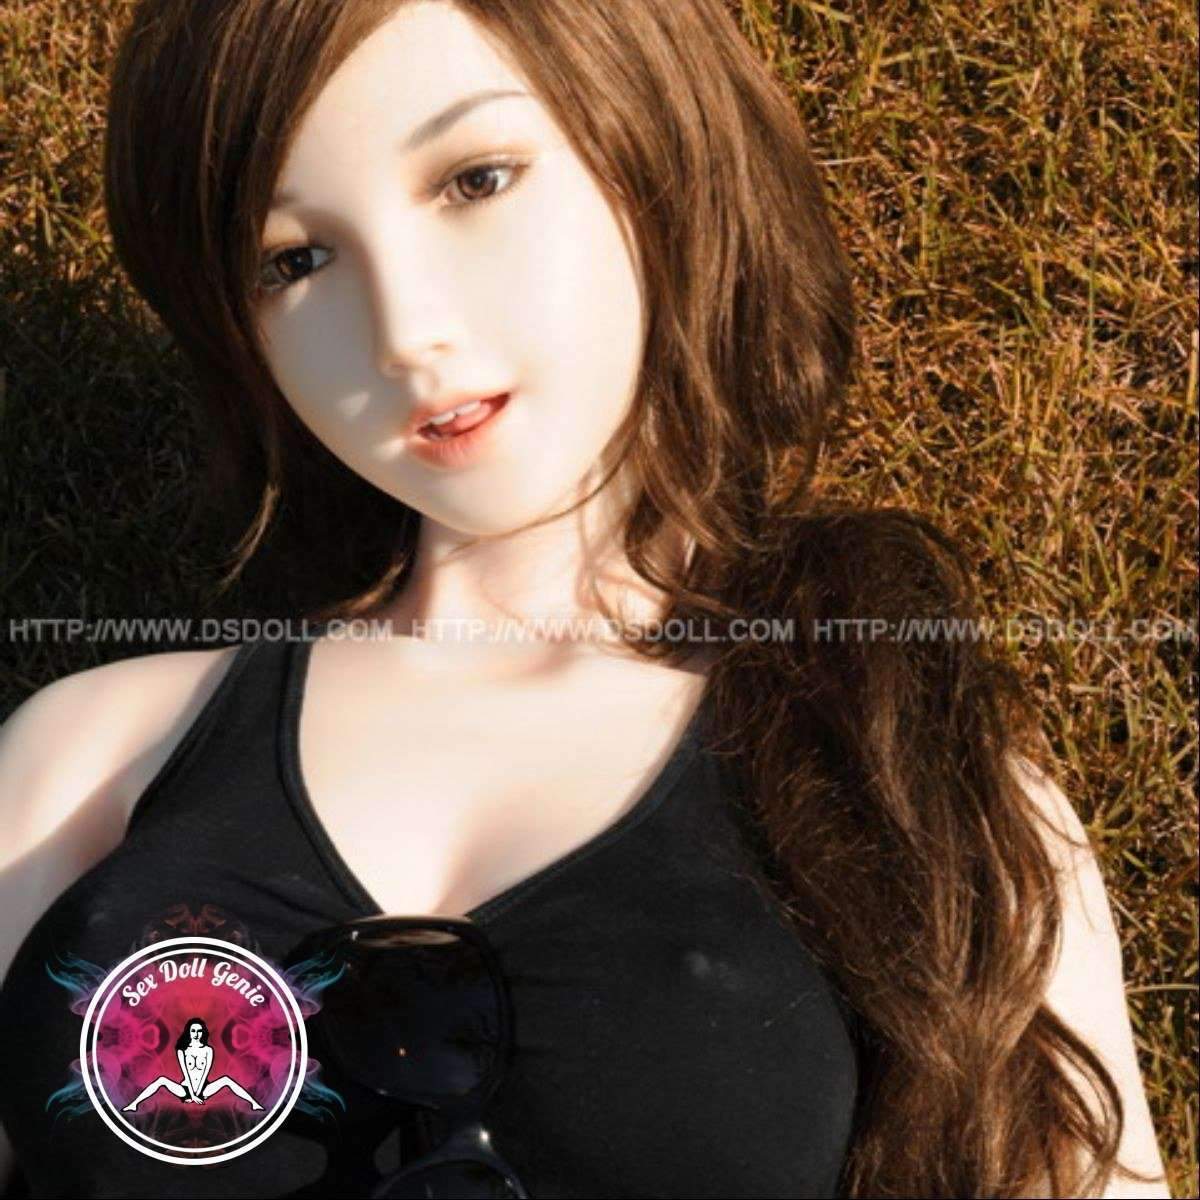 DS Doll - 160Plus - Youyi Head - Type 1 D Cup Silicone Doll-7